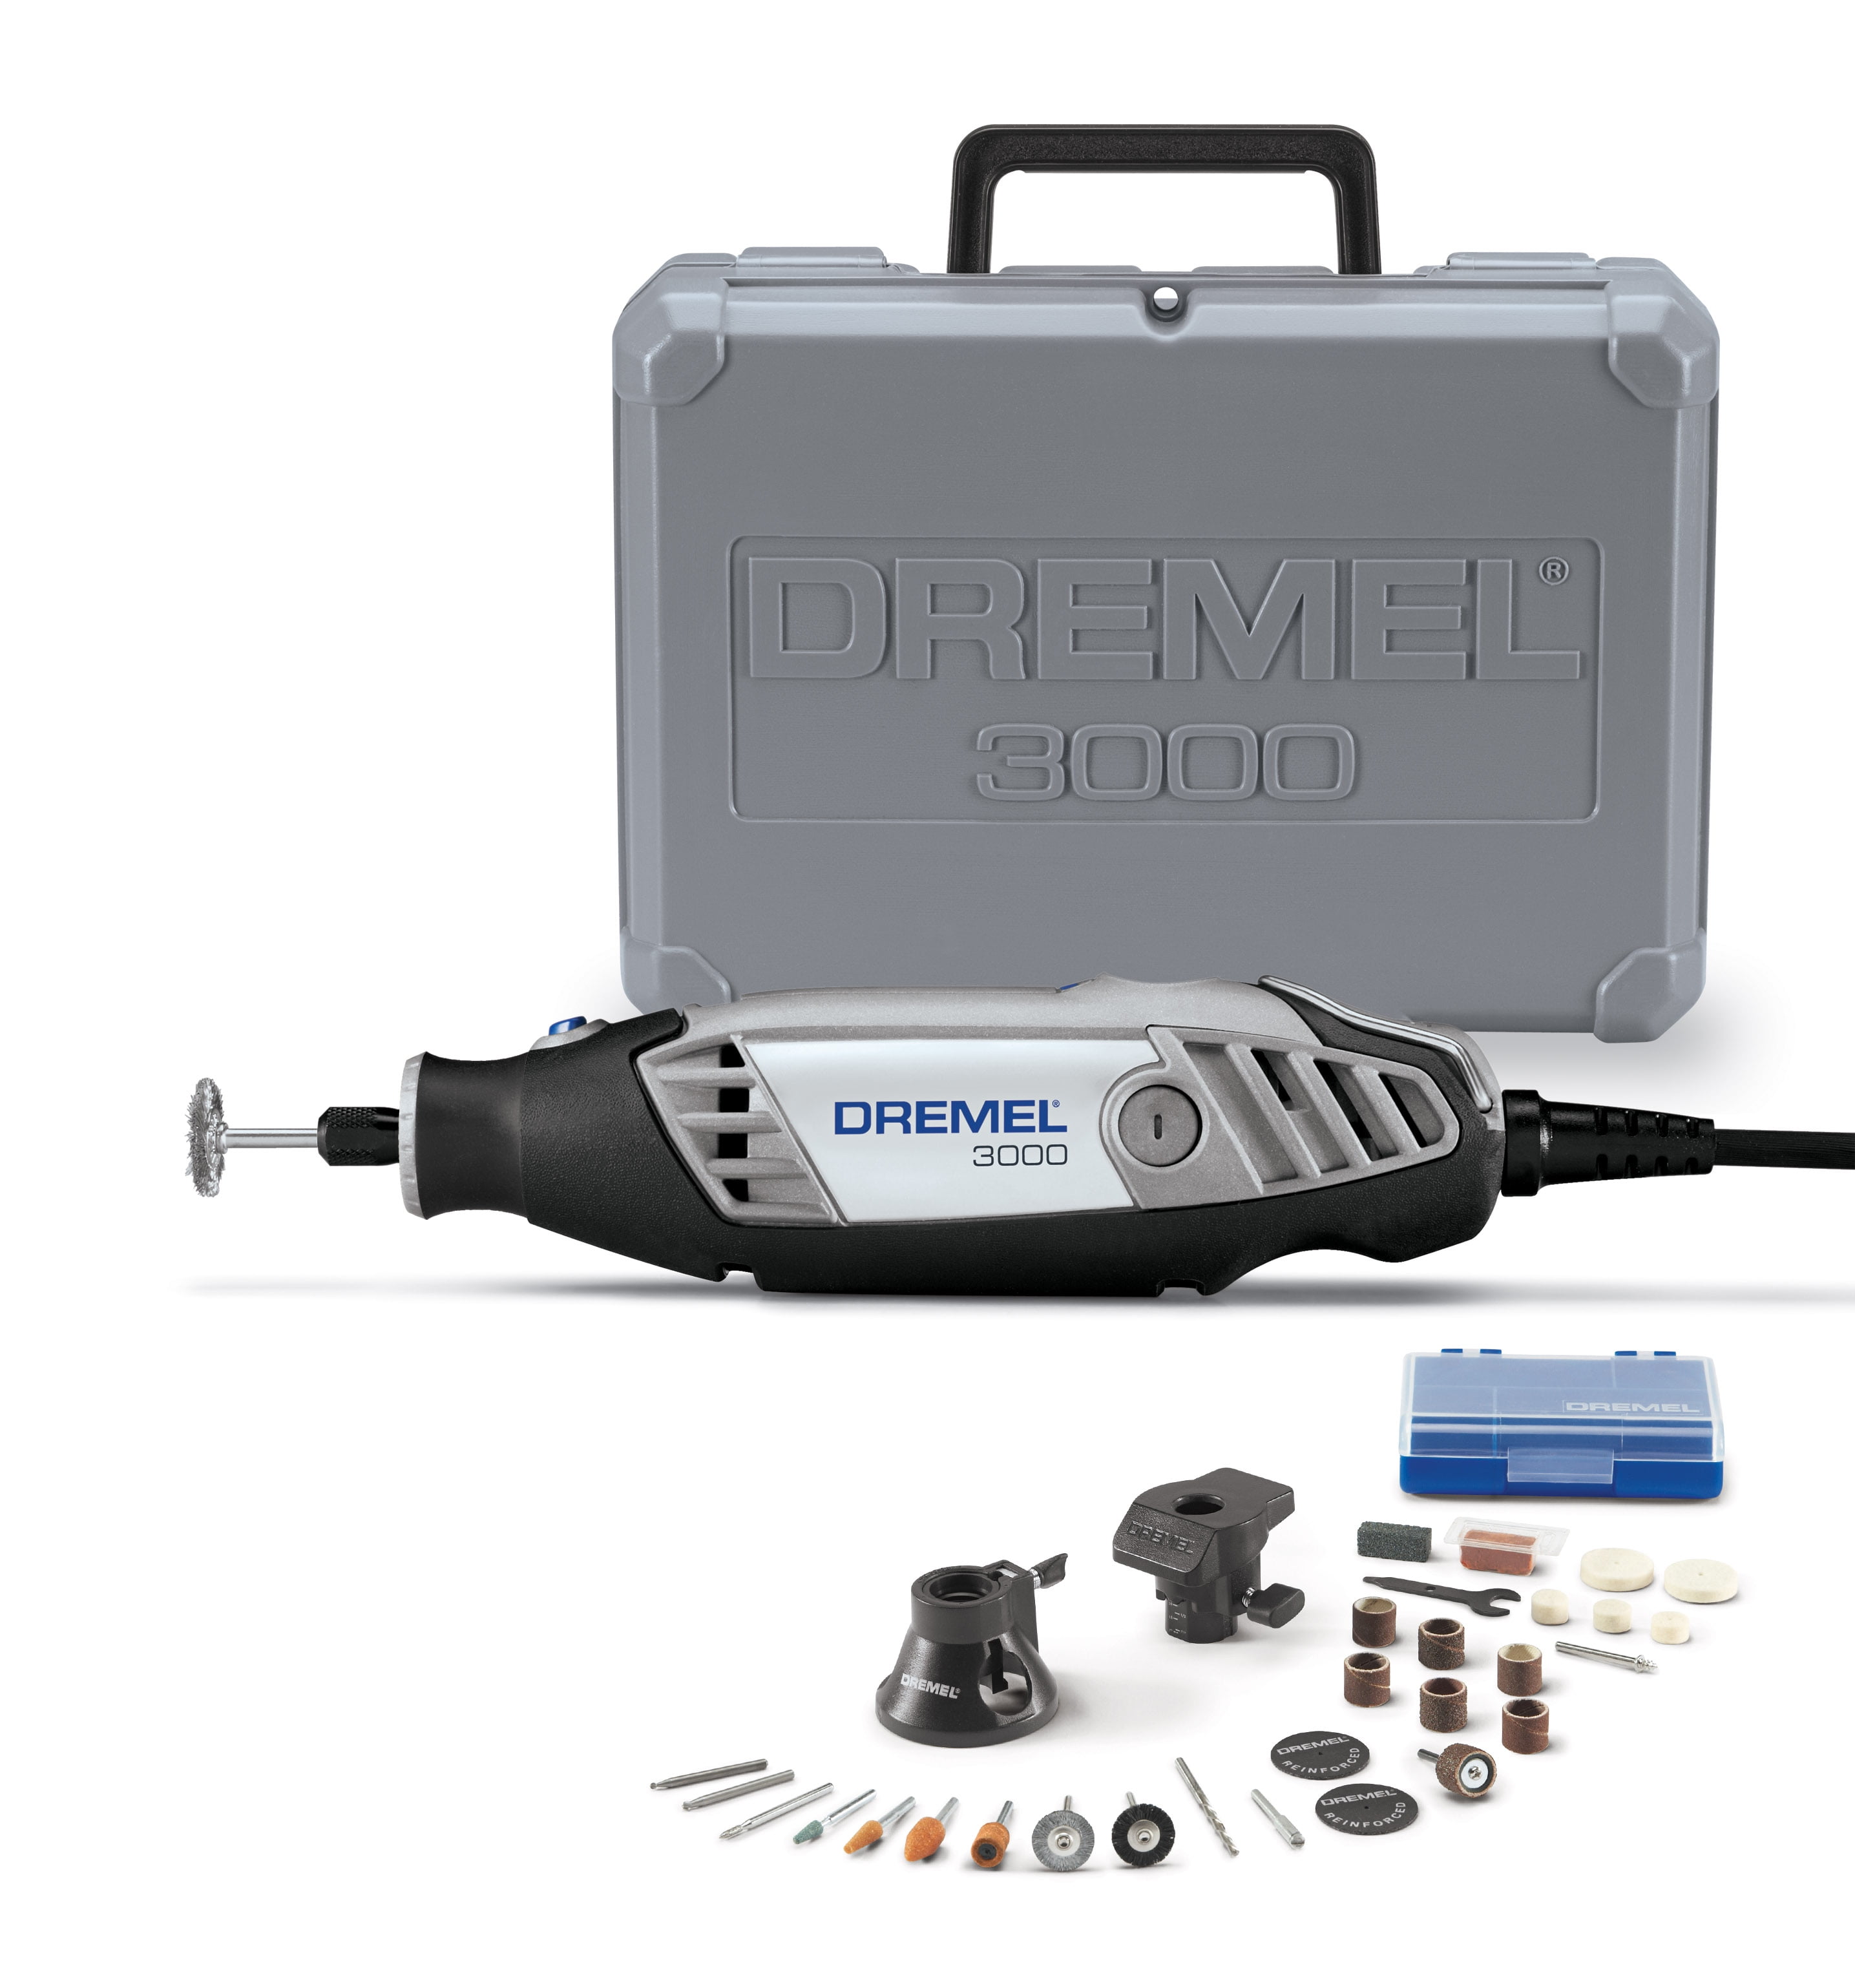 Dremel 3000-2/28 Variable Speed Rotary Tool Kit, 2 Attachments